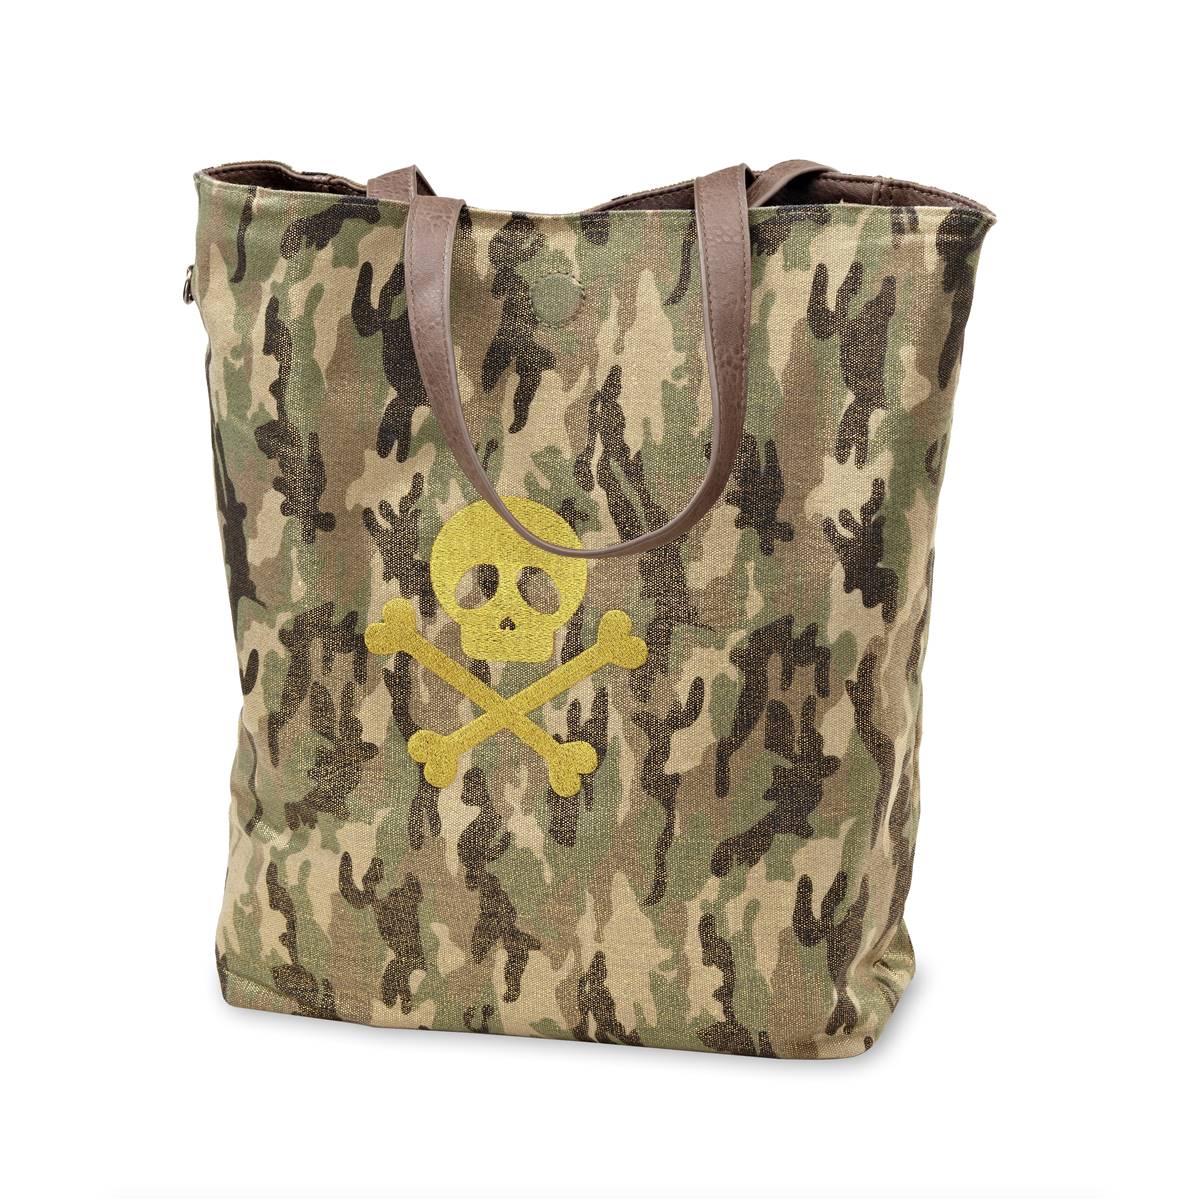 Glam Camo Tote with Skull